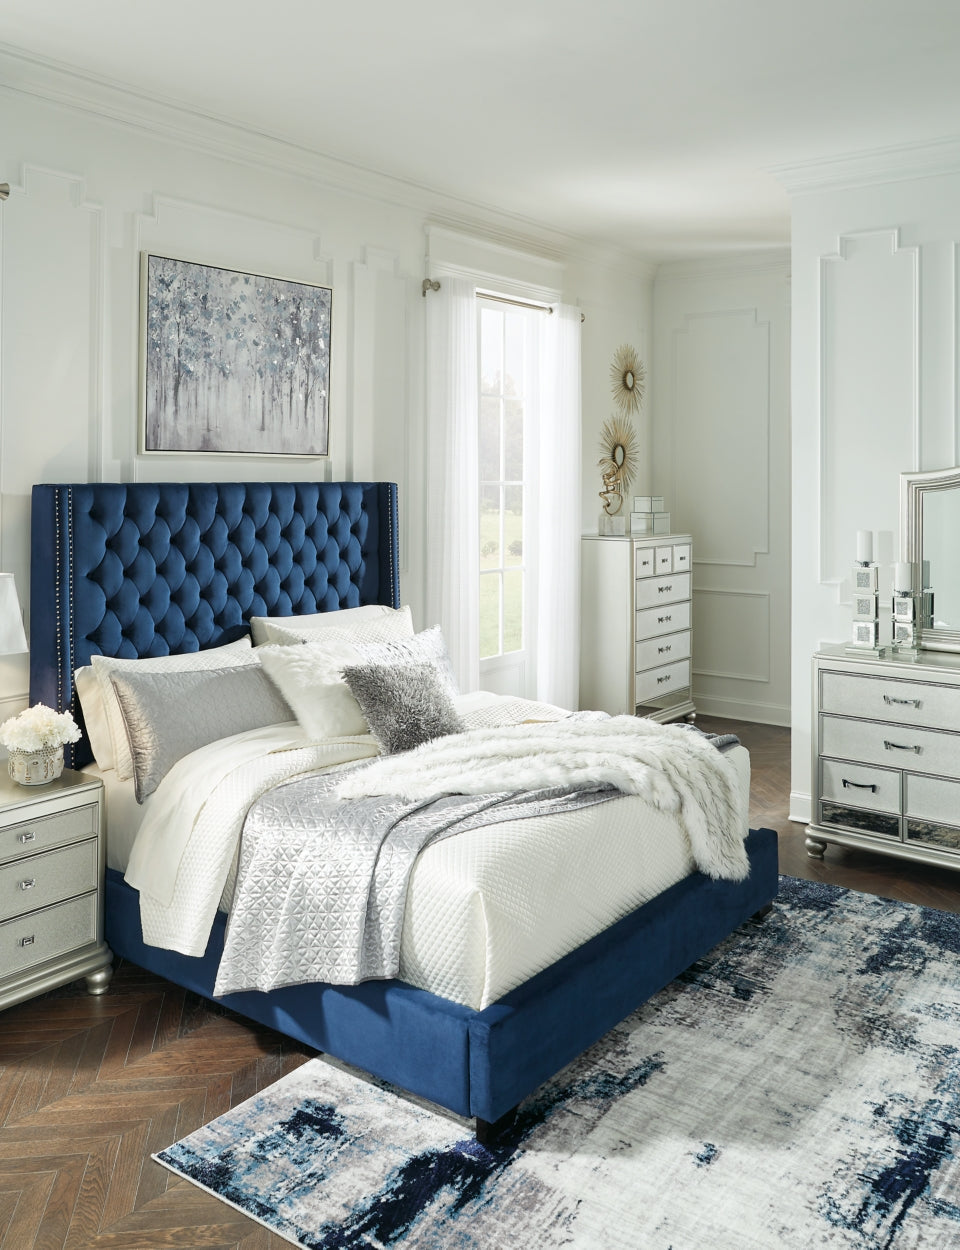 Coralayne California King Upholstered Bed - furniture place usa